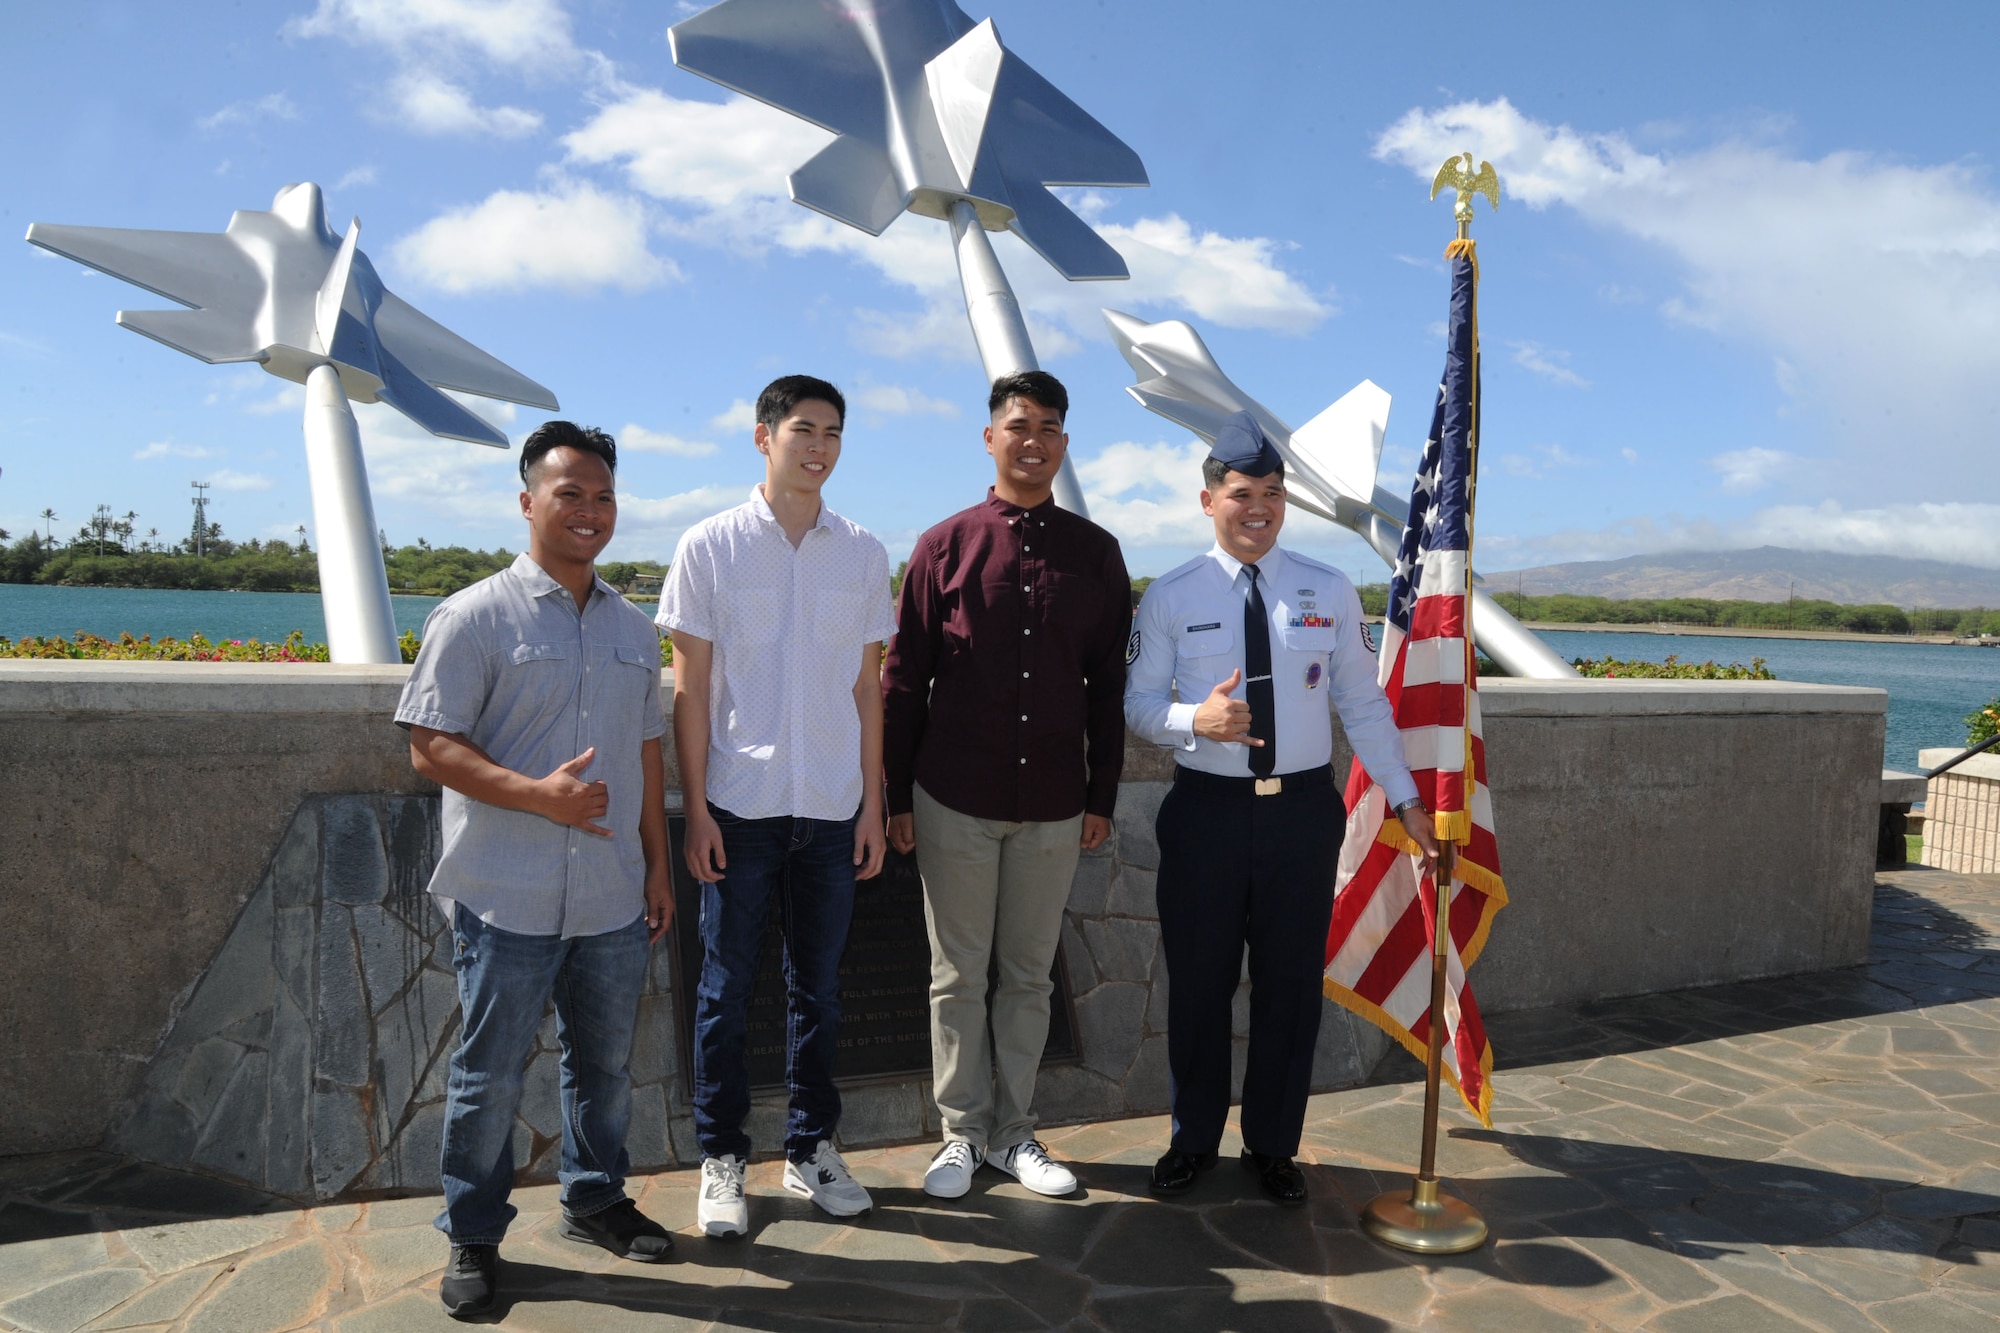 U.S. Air Force Tech. Sgt. Michael Shinohara, right, an Air Force Reserve recruiter based out of Joint Base Pearl Harbor-Hickam, Hawaii, brought three recruits to the Missing Man Formation, JBPH-H to conduct their oath of enlistment Nov. 30, 2016. Left to right: Mark Corpuz, of Ewa Beach, who is joining the 624th Aeromedical Staging Squadron as a medical admin, Allan Lai, of Honolulu, and Bryson Primacio, of Kapolei, are joining the 48th Aerial Port Squadron as Air Transportation specialists. The 624th ASTS and the 48th APS supports the 624th Regional Support Group's mission to deliver mission essential capability through combat readiness, quality management and peacetime deployments in the Pacific area of responsibility. (U.S. Air Force photo by Master Sgt. Theanne Herrmann) 